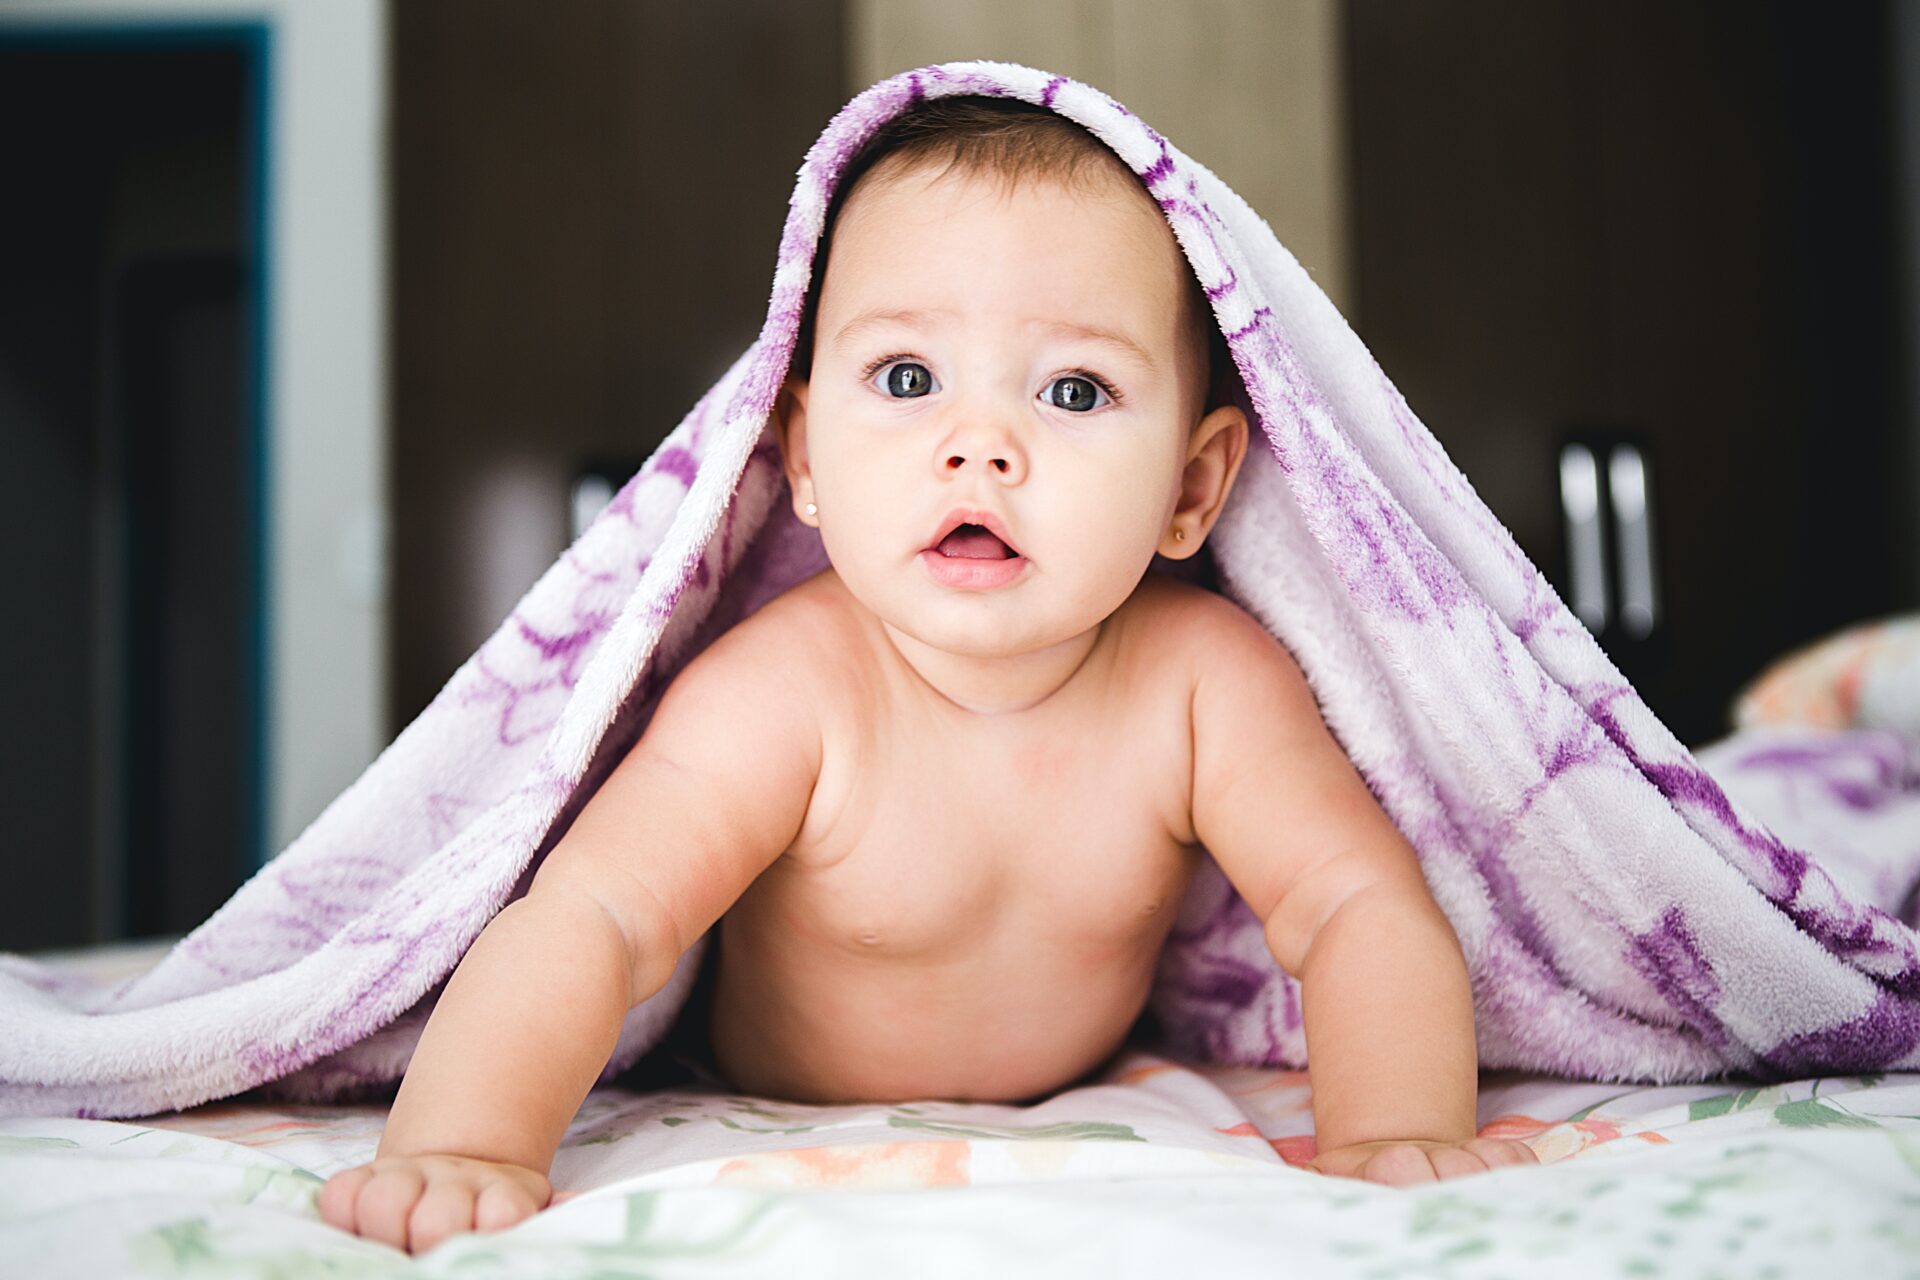 Is Carpet Cleaning Safe For Babies?